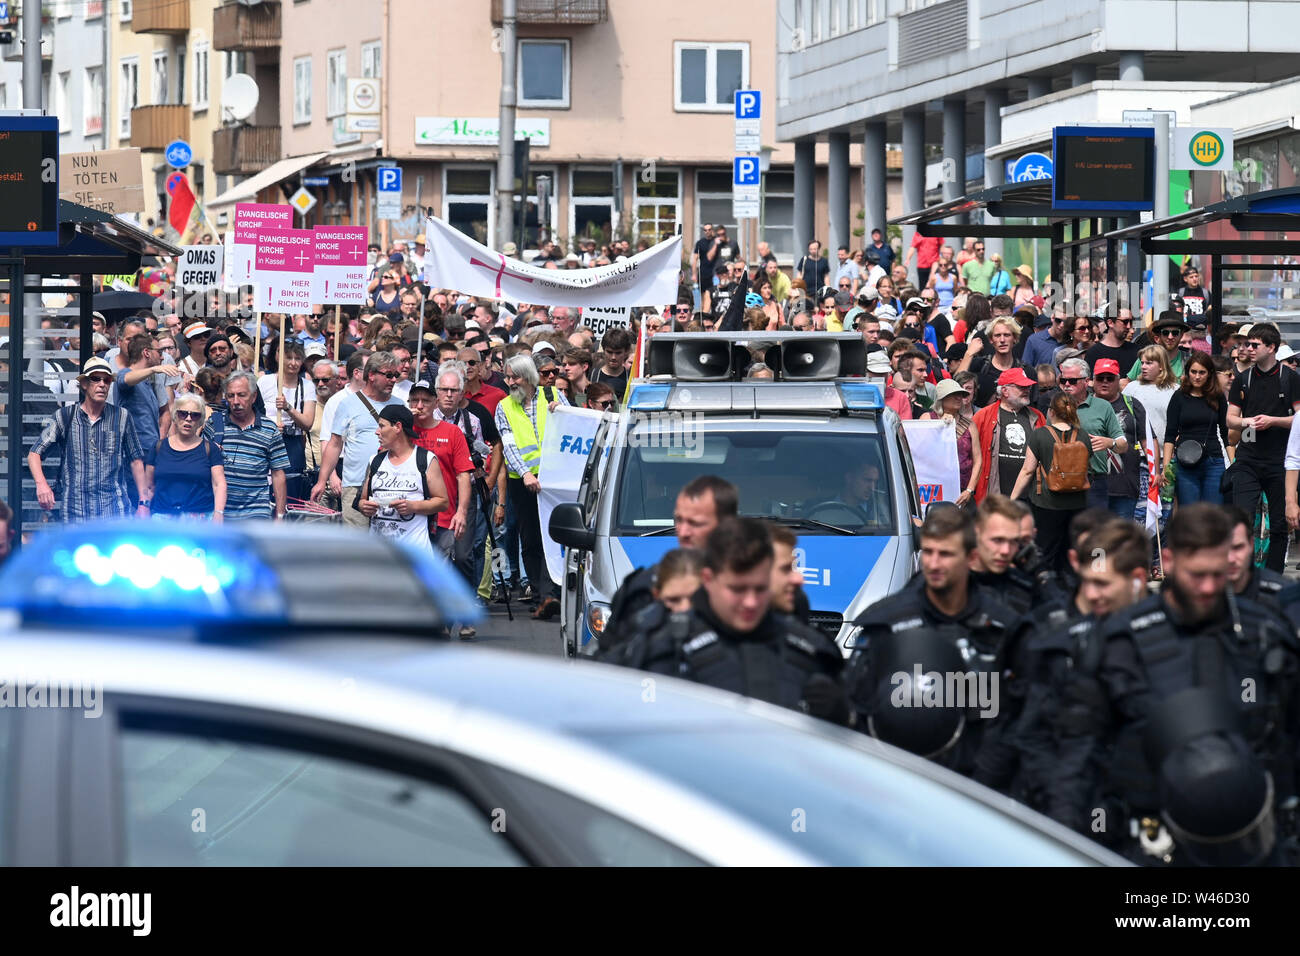 Kassel, Germany. 20th July, 2019. Thousands demonstrate against the march of the smallest party 'The Right'. The party had called for a demonstration in Kassel against media prejudgement in connection with the Lübcke case. A massive police presence is to prevent possible riots between the two camps. Credit: Uwe Zucchi/dpa/Alamy Live News Stock Photo